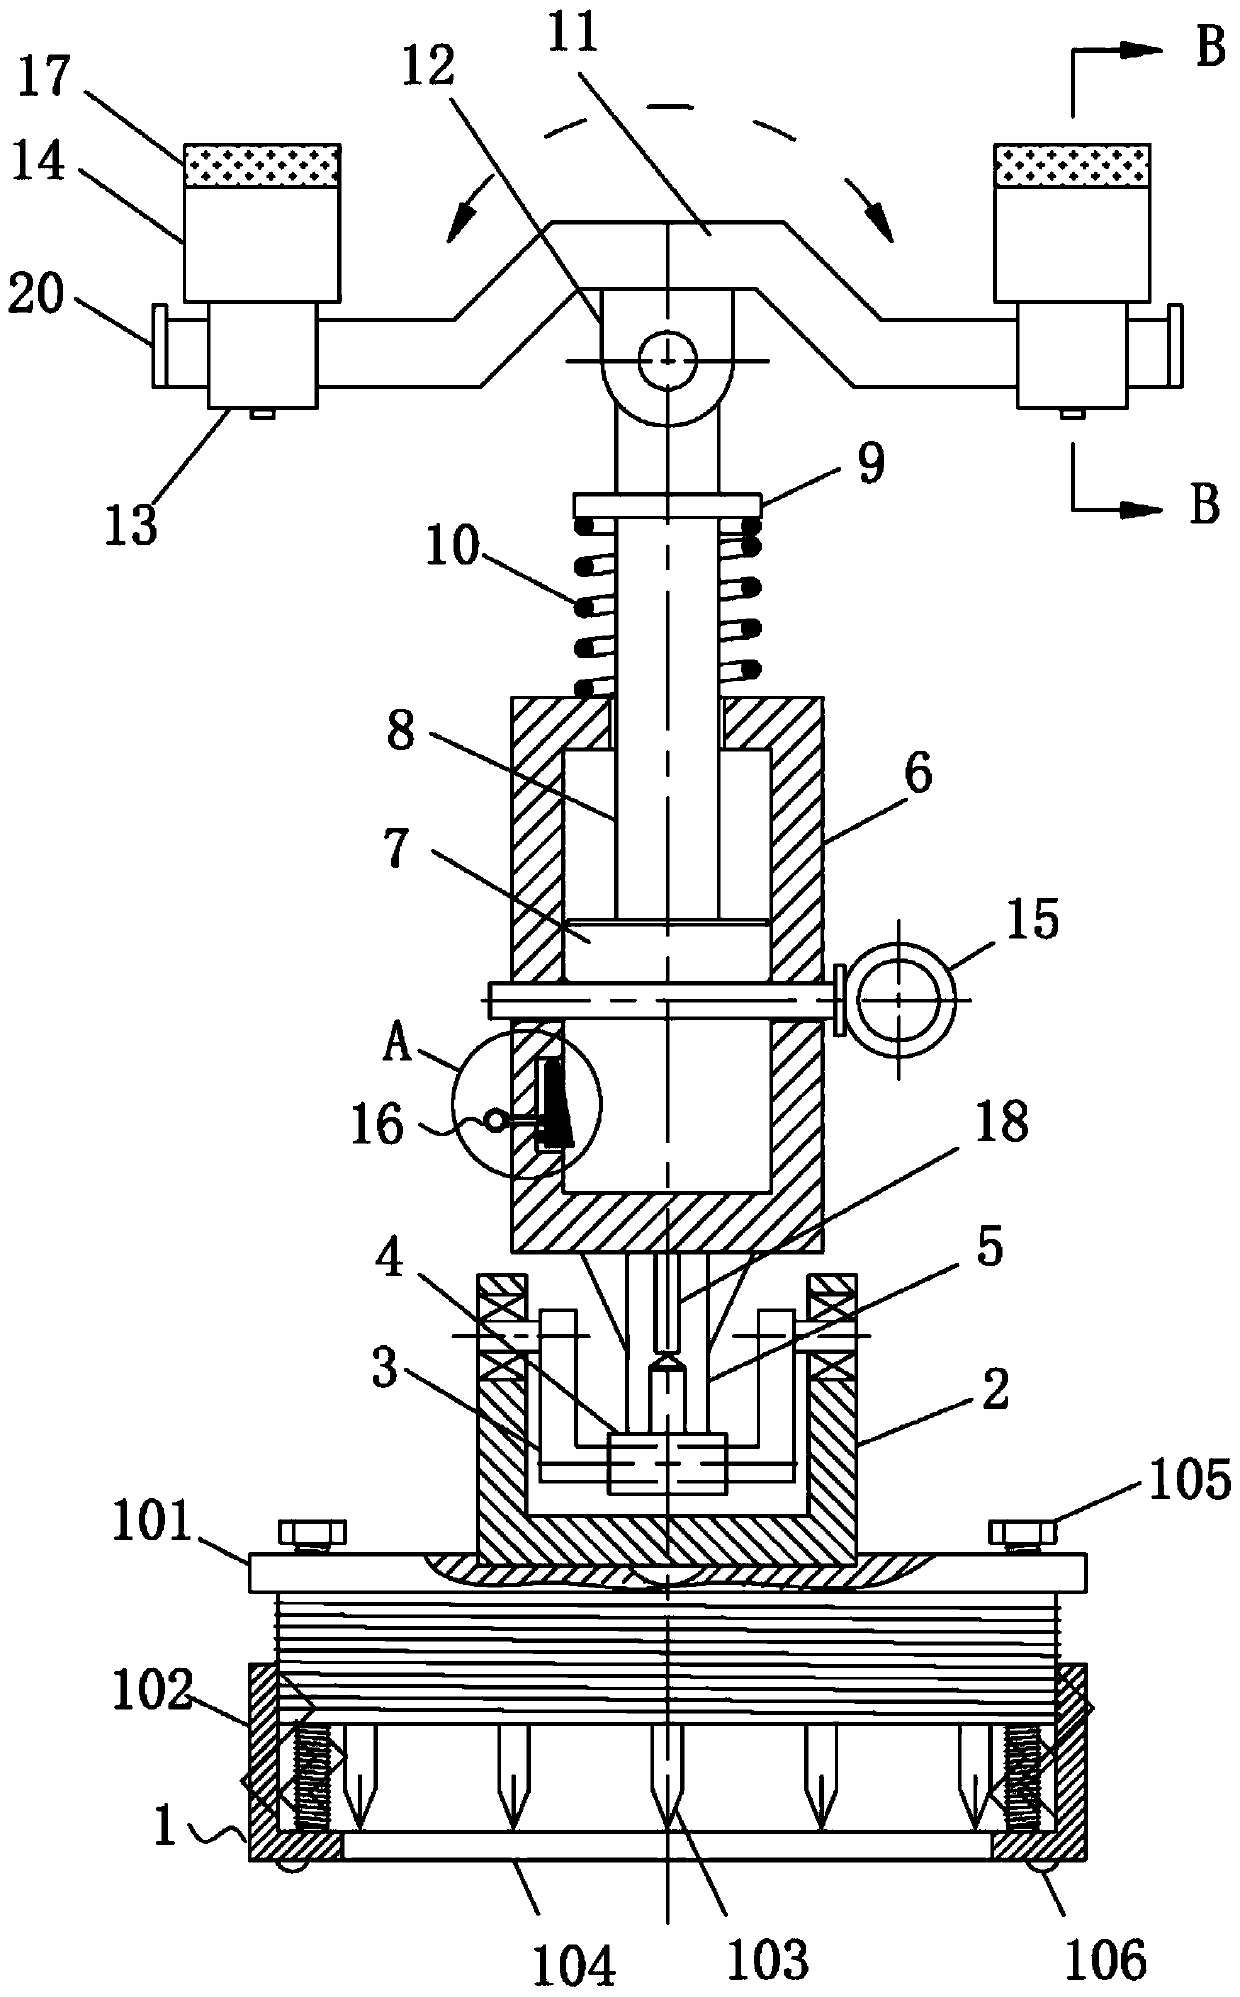 Mechanical support device for assisting in replacing spare tire